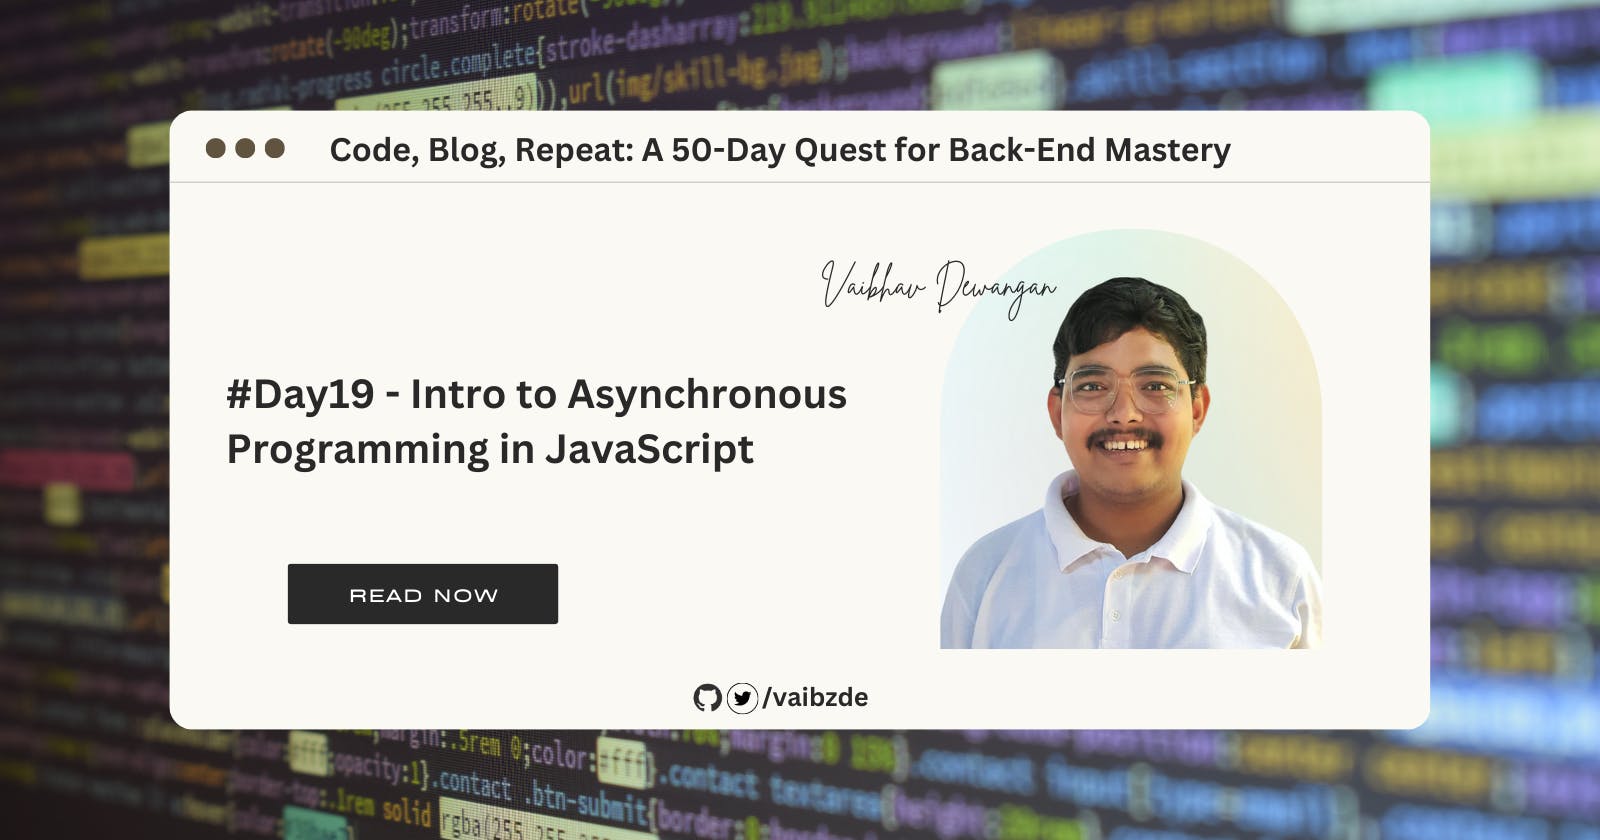 #Day19 - Intro to Asynchronous Programming in JavaScript